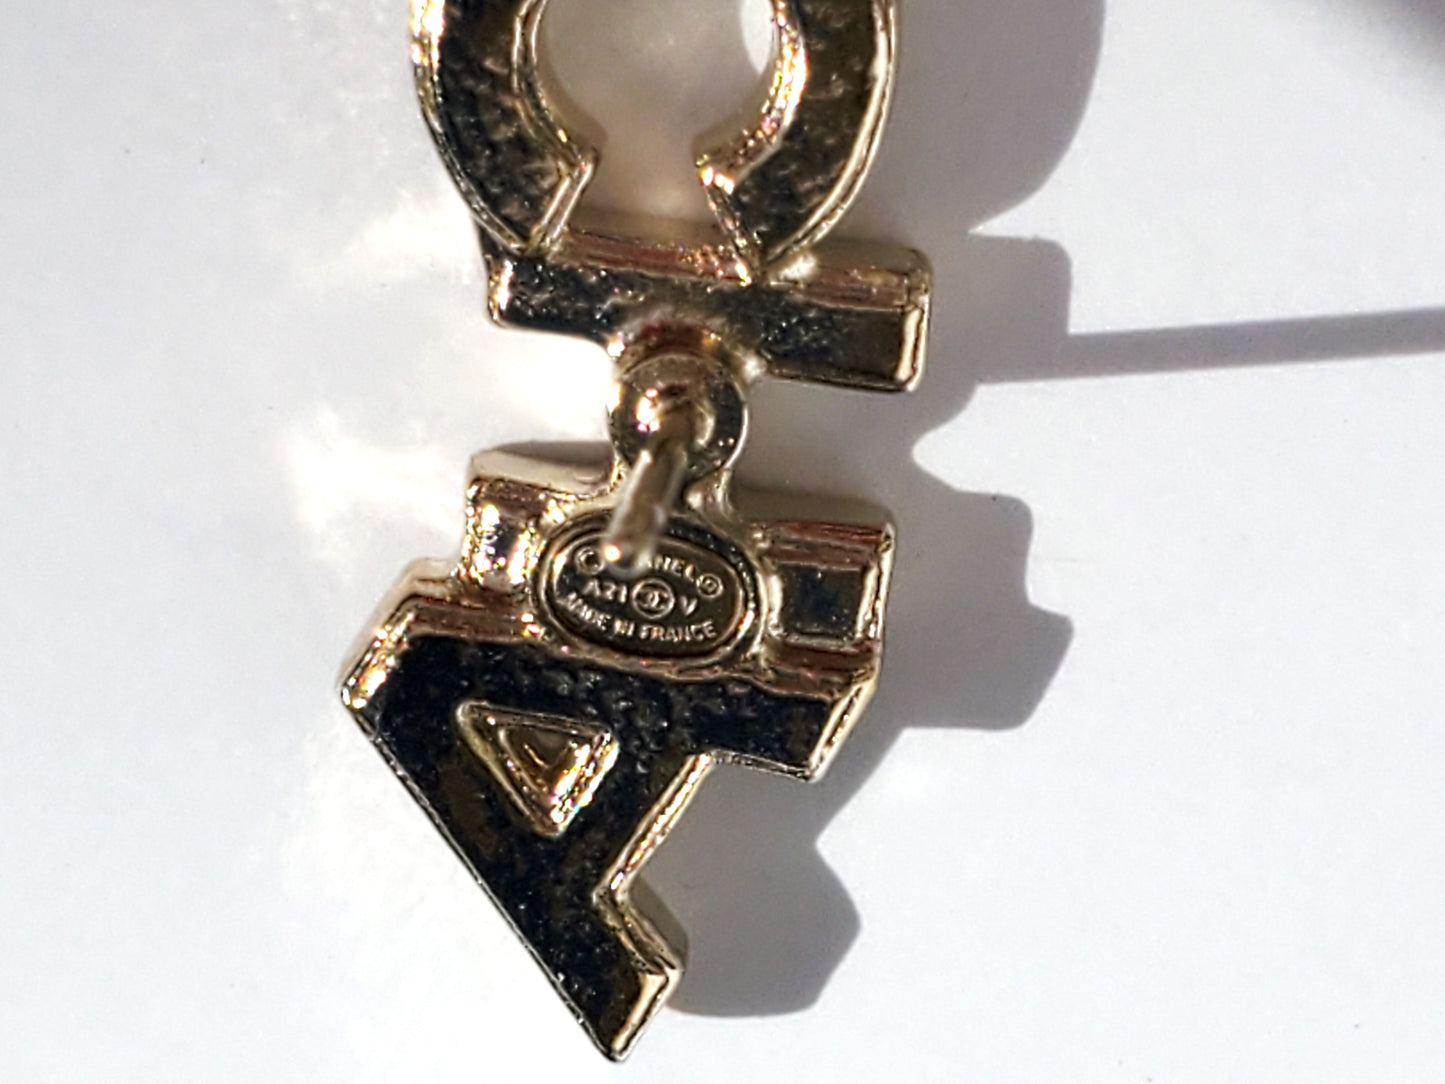 New CHANEL 2021 Gold and Crystal Logo Stud Signature Earrings